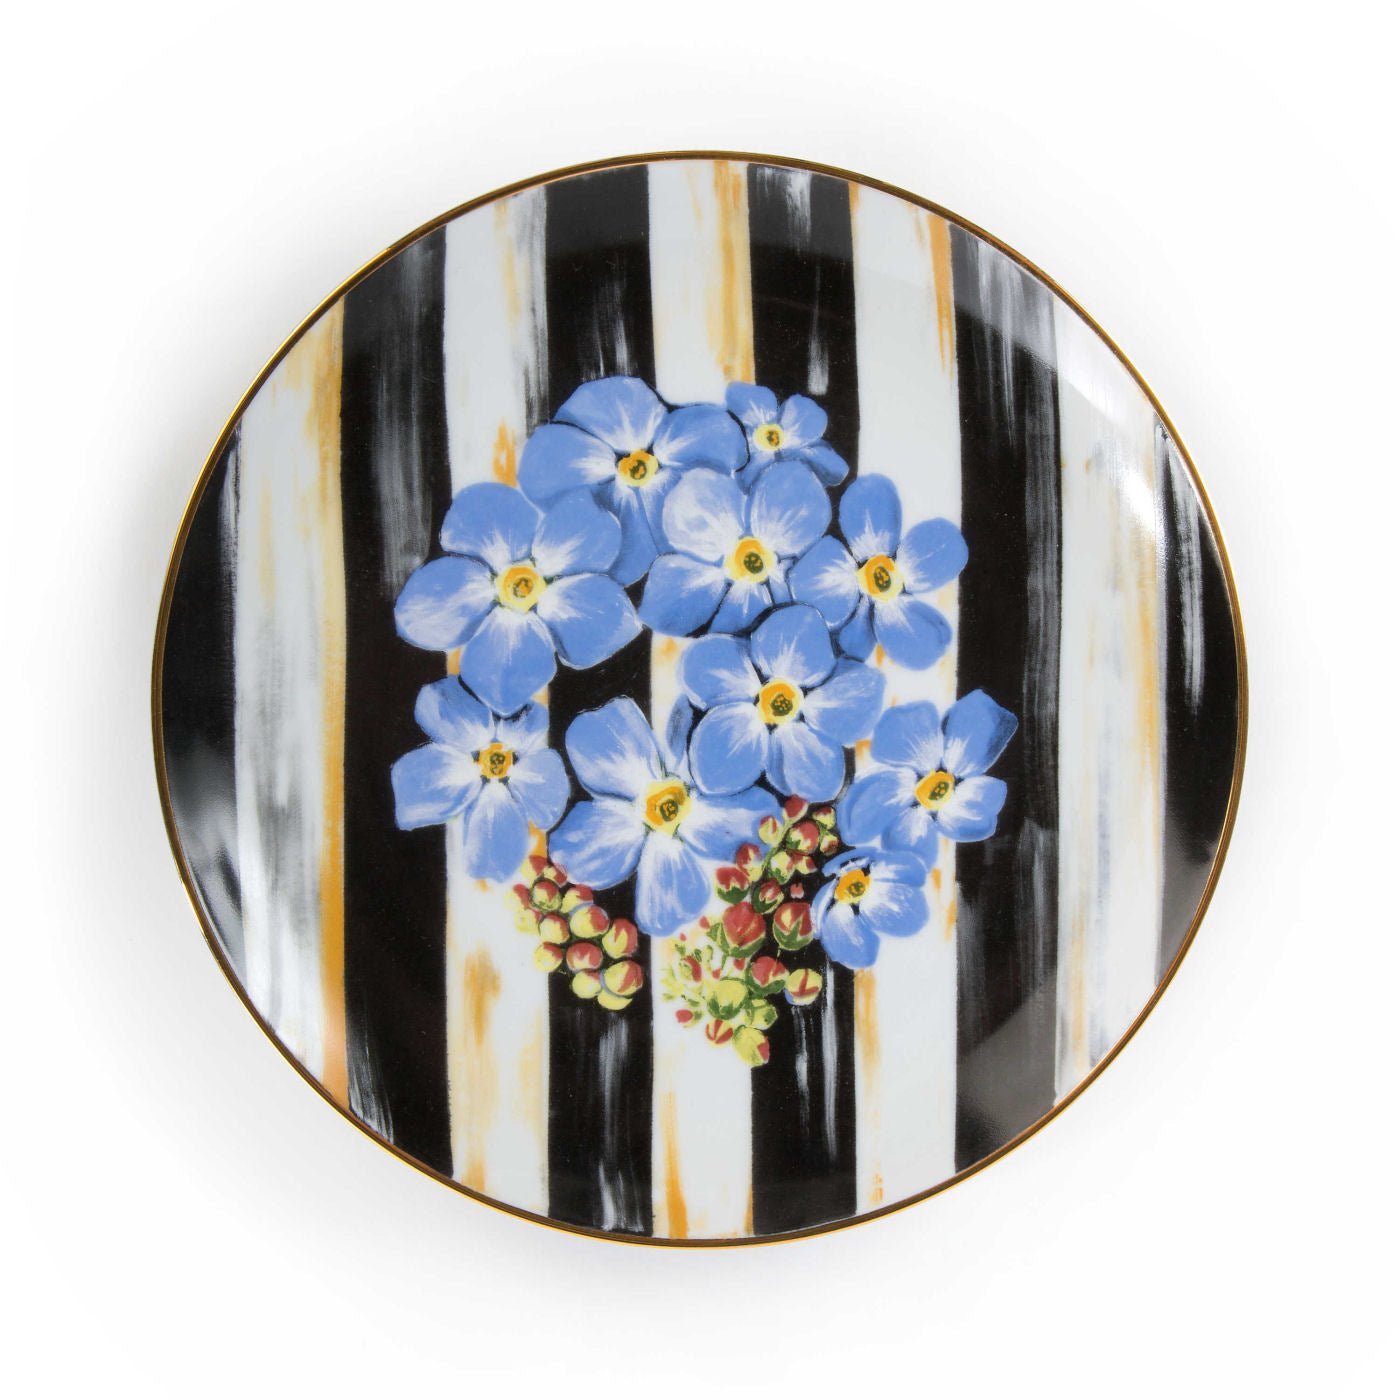 Thistle & Bee Salad Plate - Forget-Me-Not - |VESIMI Design|